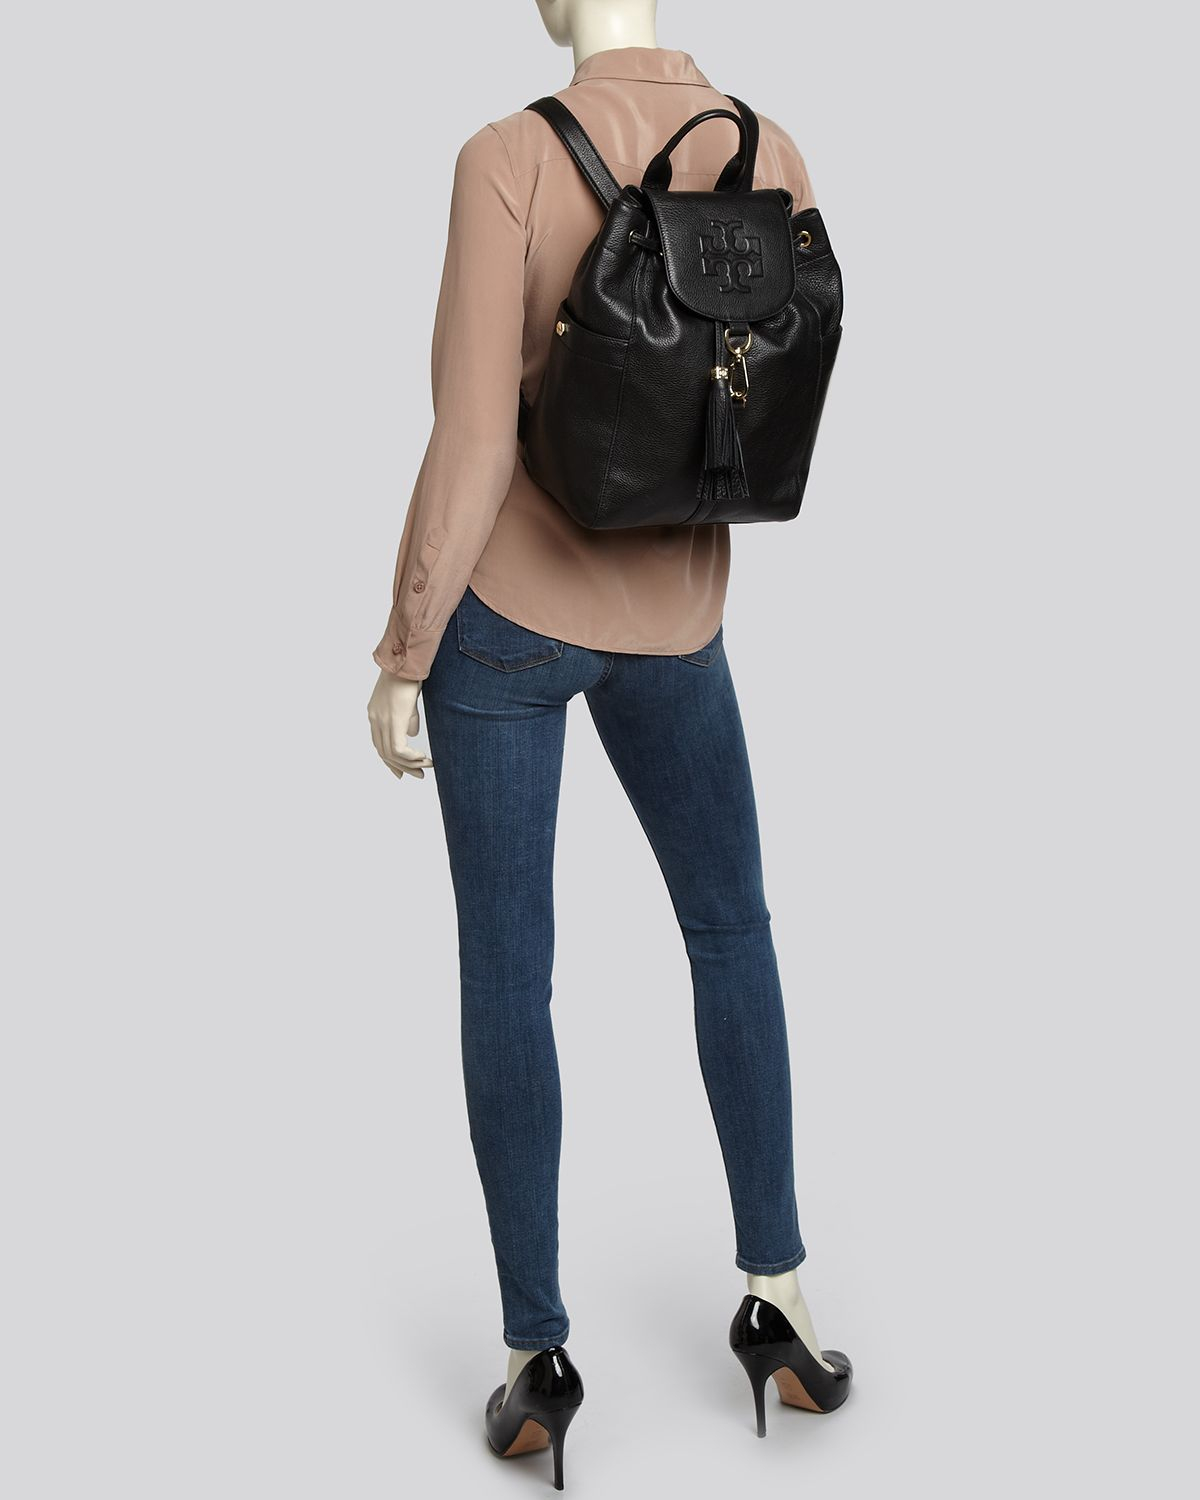 Tory burch Backpack - Thea in Black | Lyst